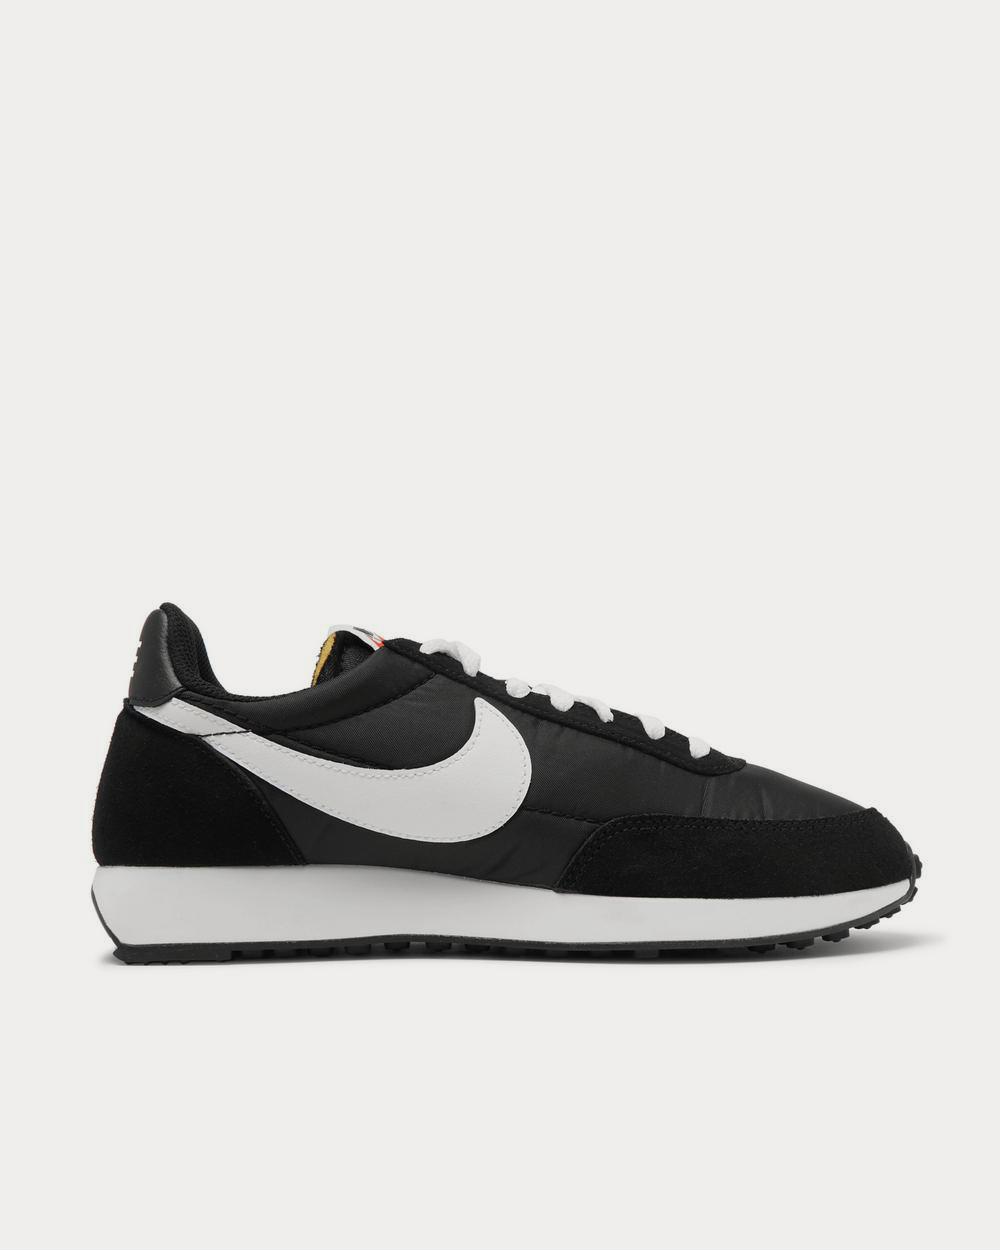 observación flotante Circular Nike Air Tailwind 79 Shell, Suede and Leather Black low top sneakers -  Sneak in Peace